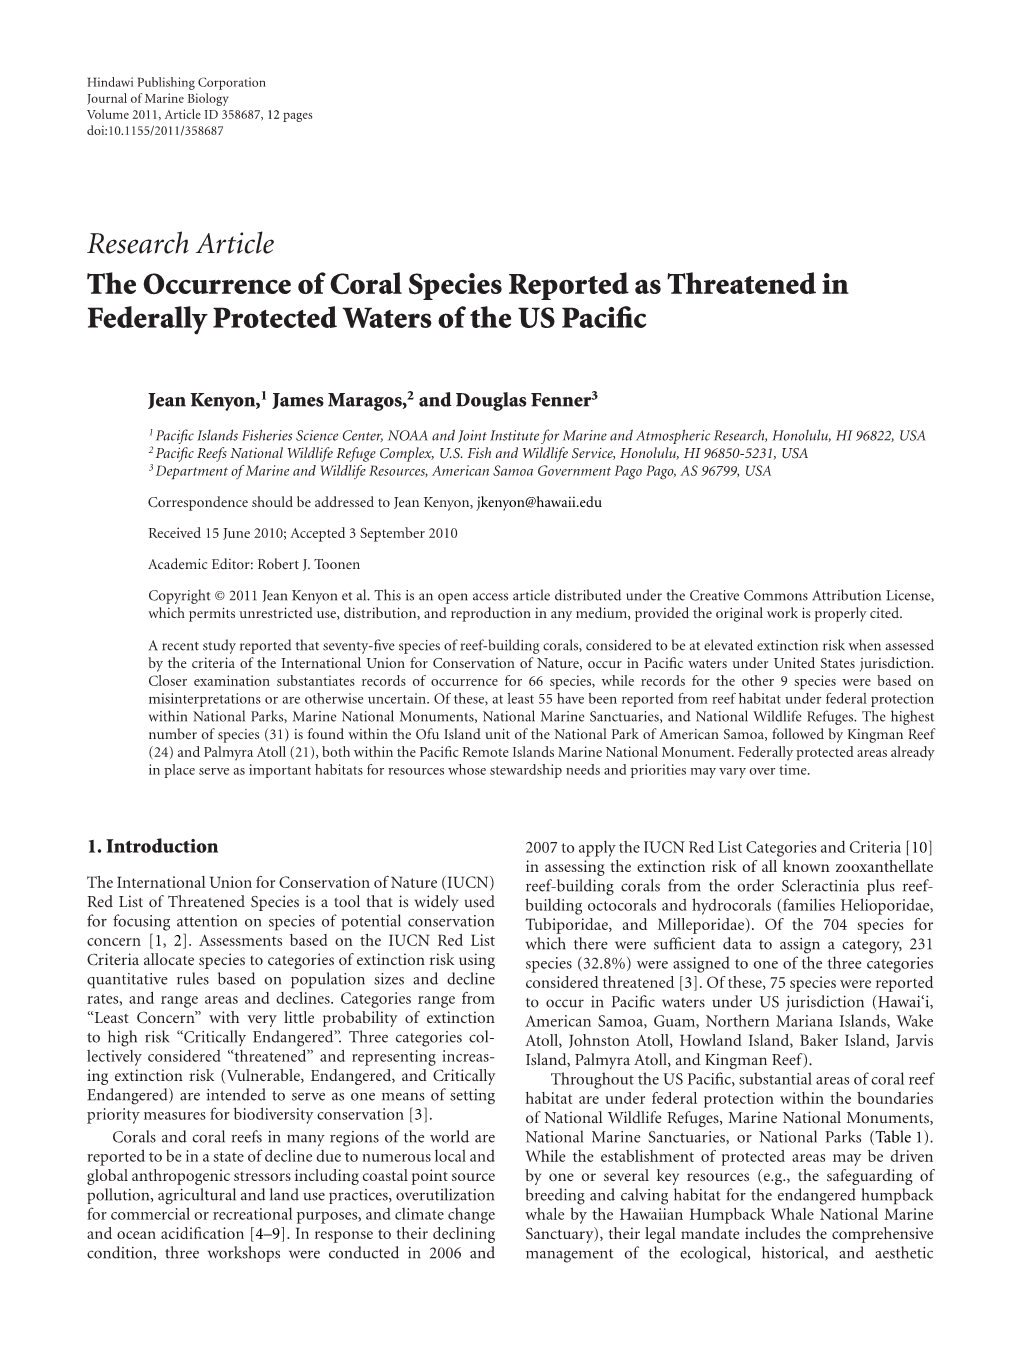 Research Article the Occurrence of Coral Species Reported As Threatened in Federally Protected Waters of the US Paciﬁc